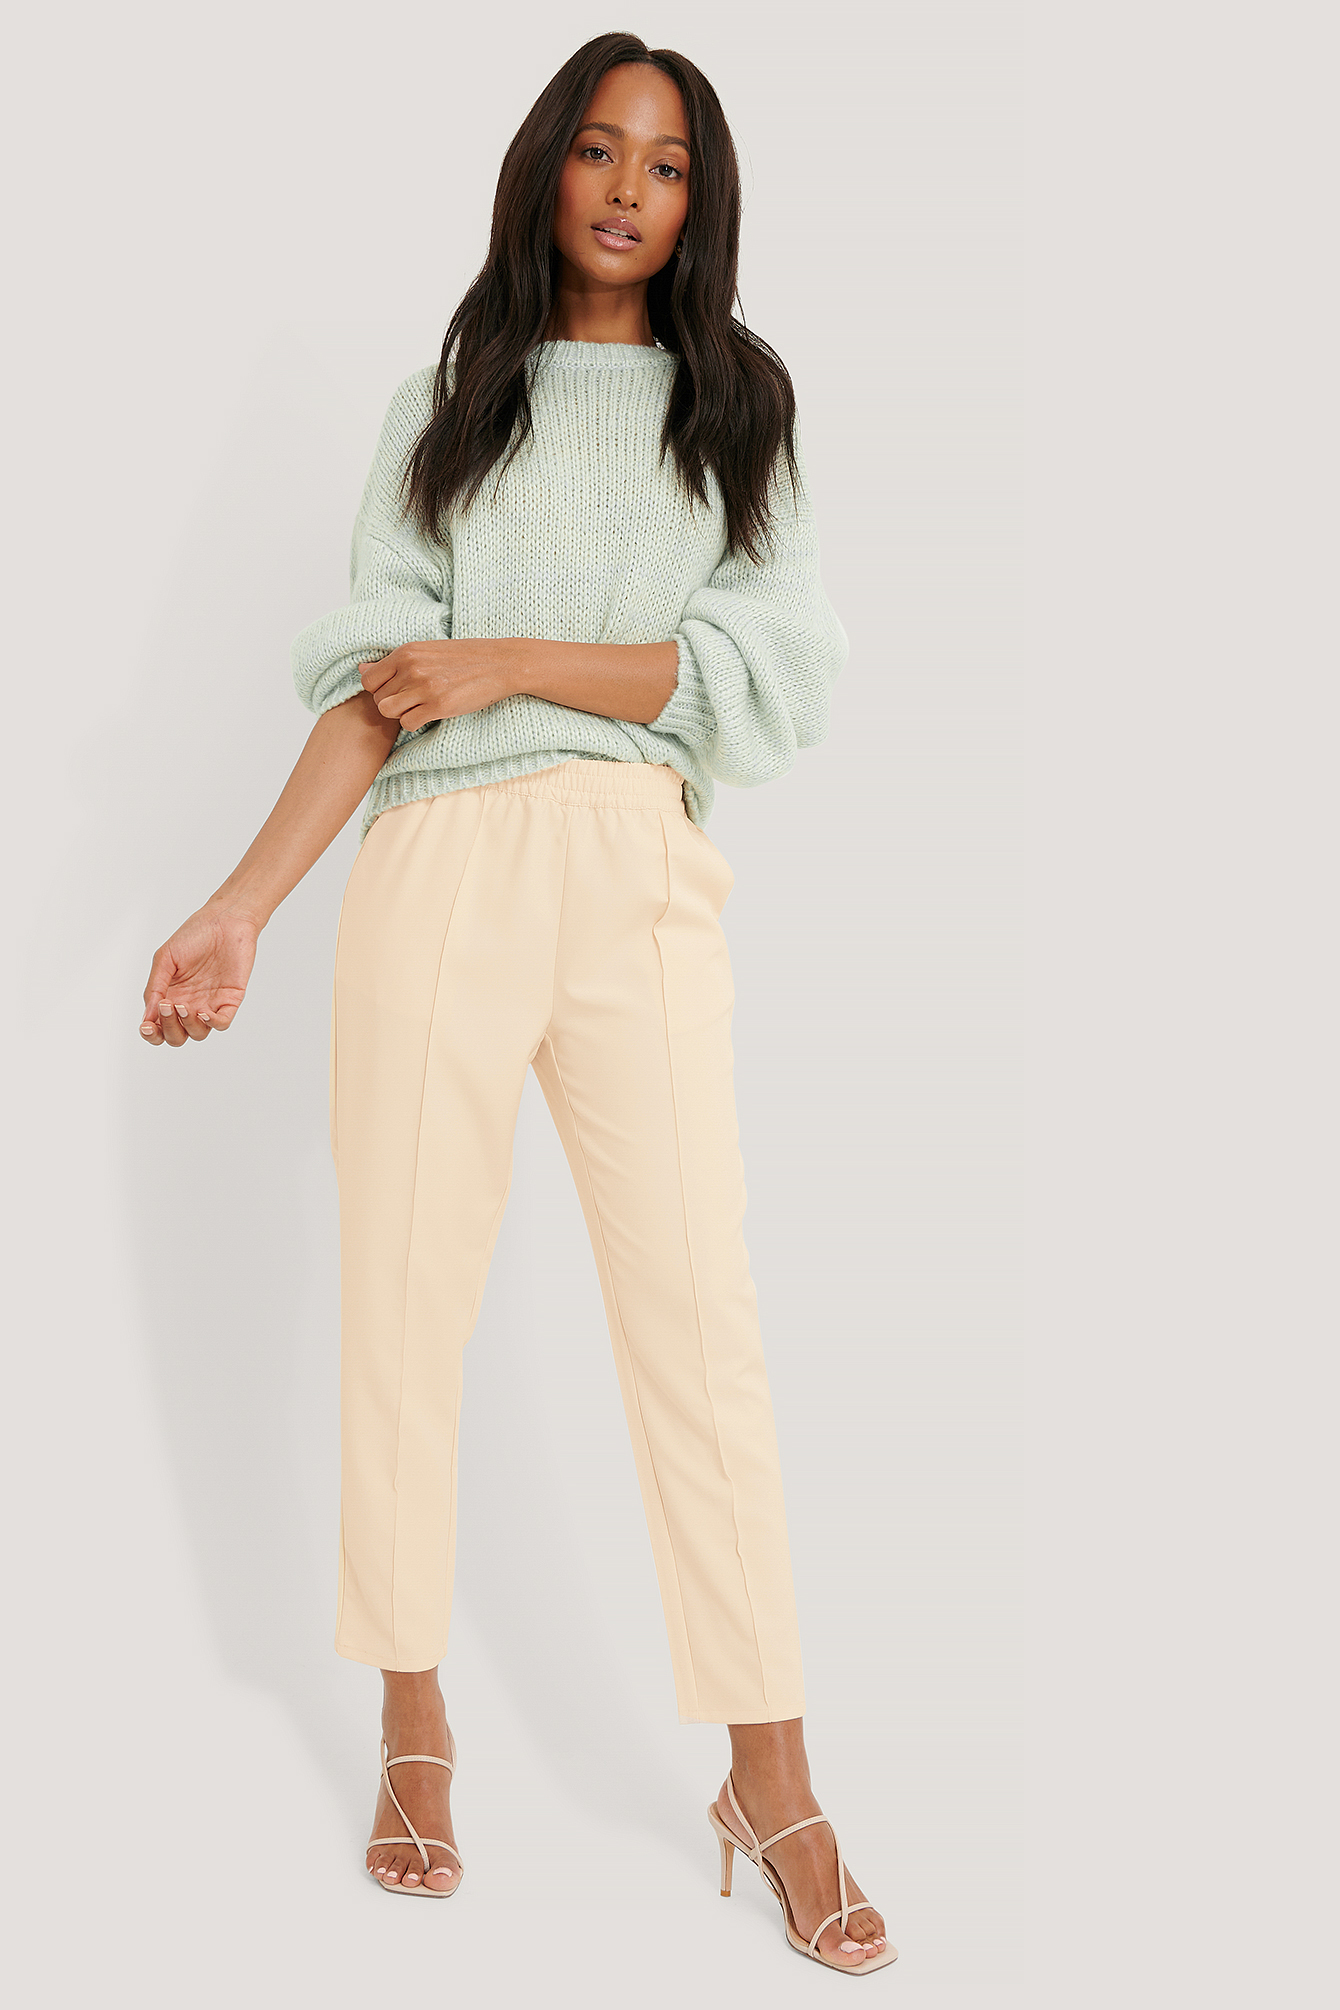 Buy White Pants for Women by AVAASA MIX N' MATCH Online | Ajio.com